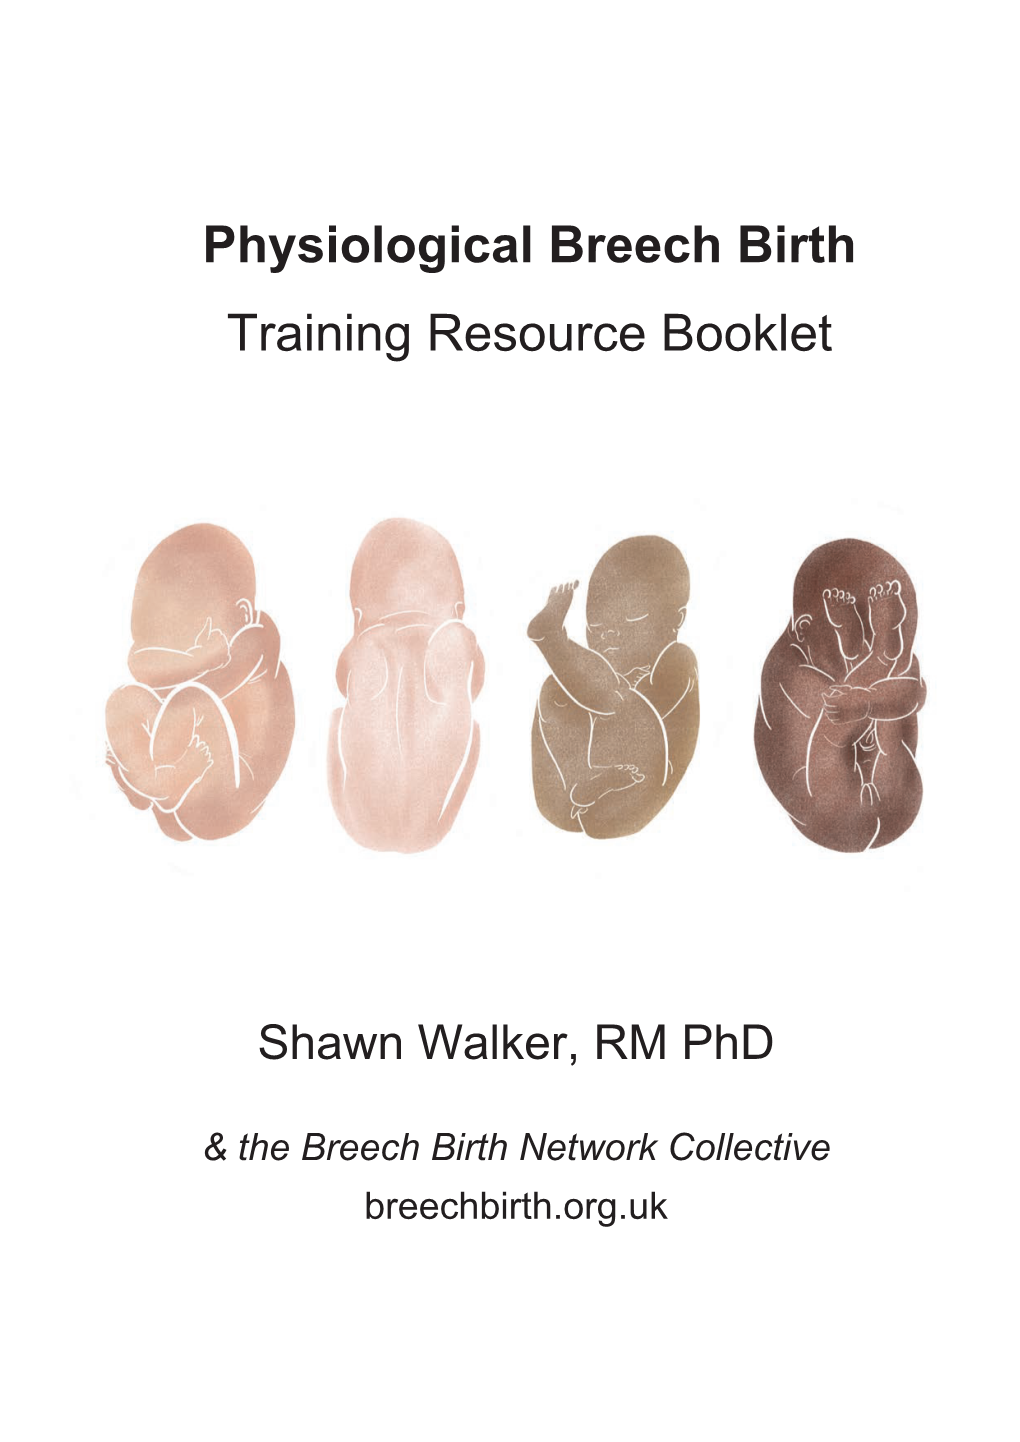 Physiological Breech Birth Training Resource Booklet